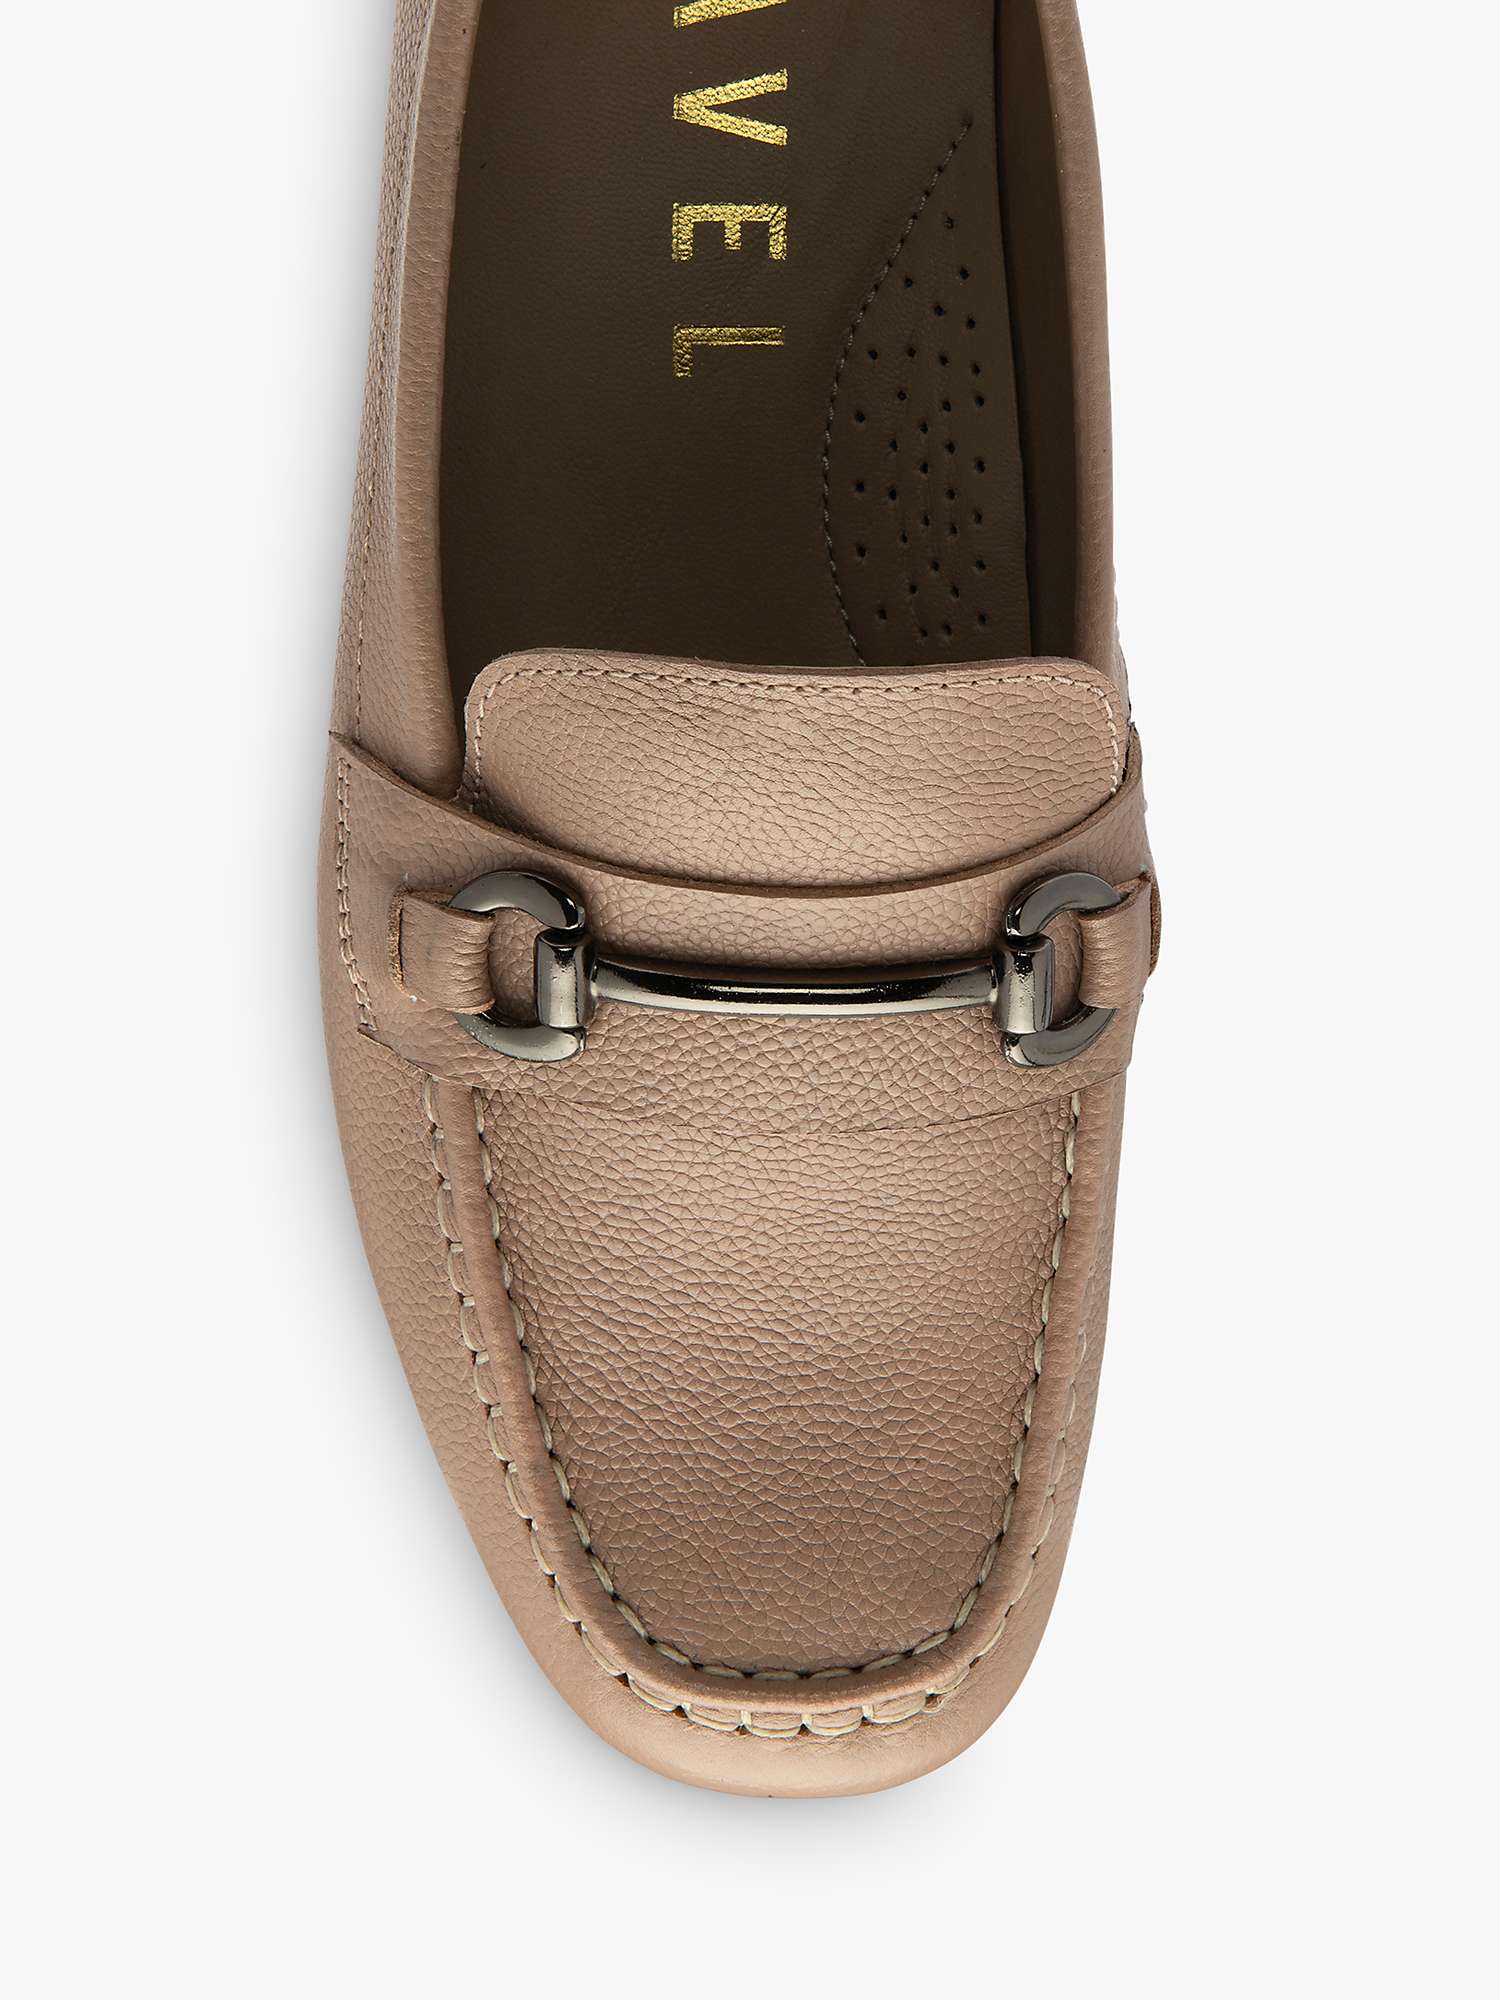 Buy Ravel Dutton Leather Loafers Online at johnlewis.com